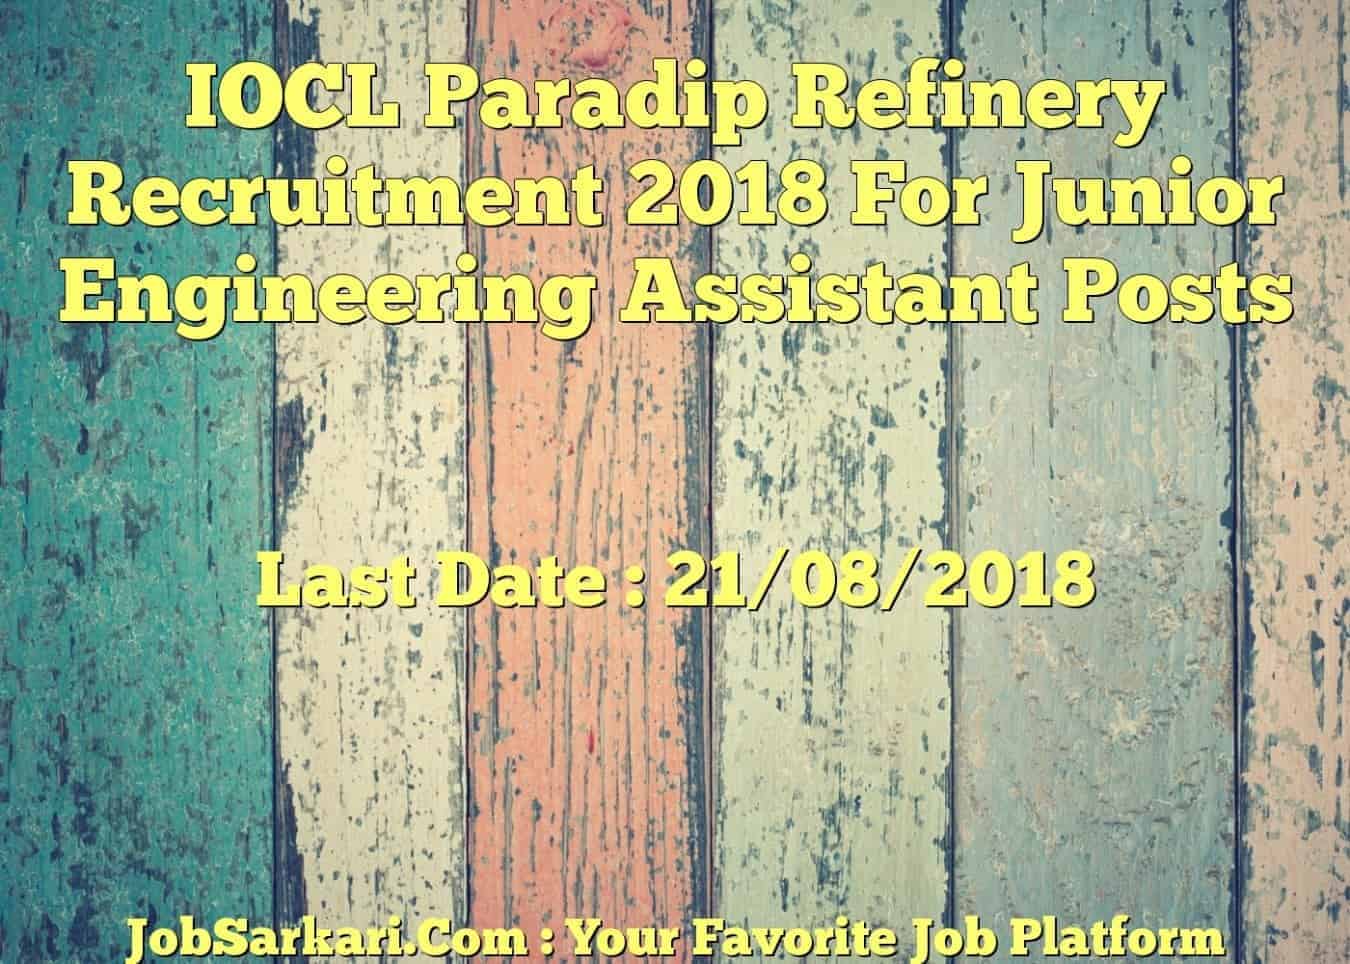 IOCL Paradip Refinery Recruitment 2018 For Junior Engineering Assistant Posts